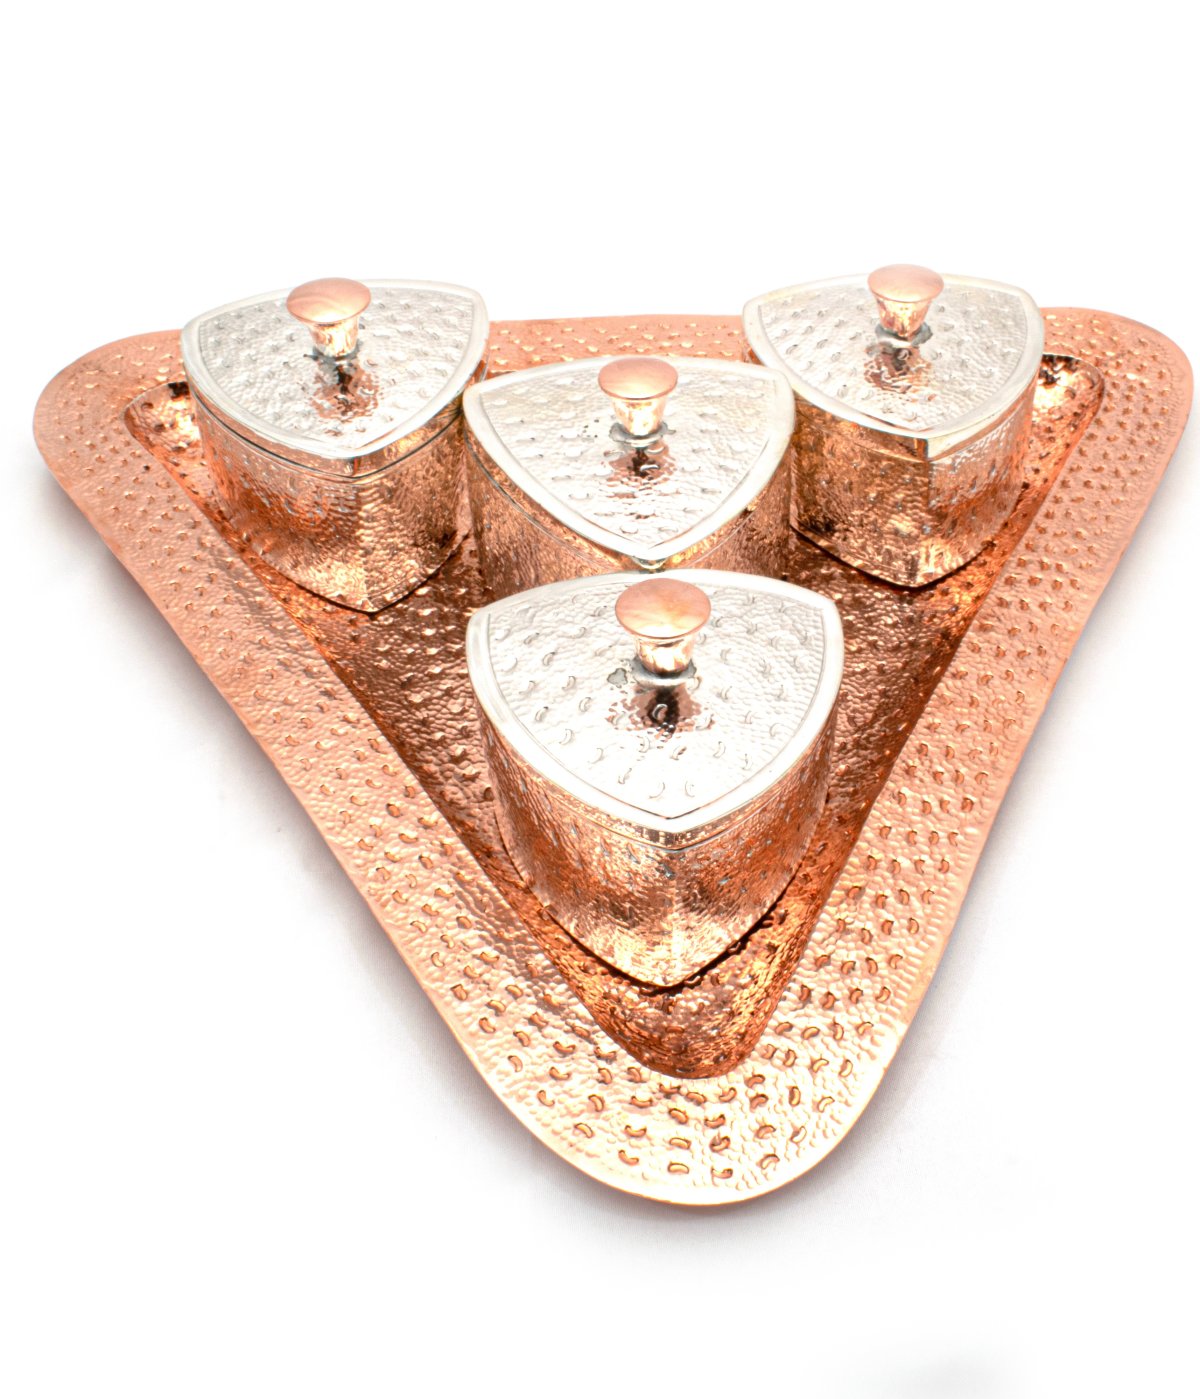 92.5 PURE SILVER ROSE GOLD DRY FRUIT PLATE SET FOR MULTI PURPOSE